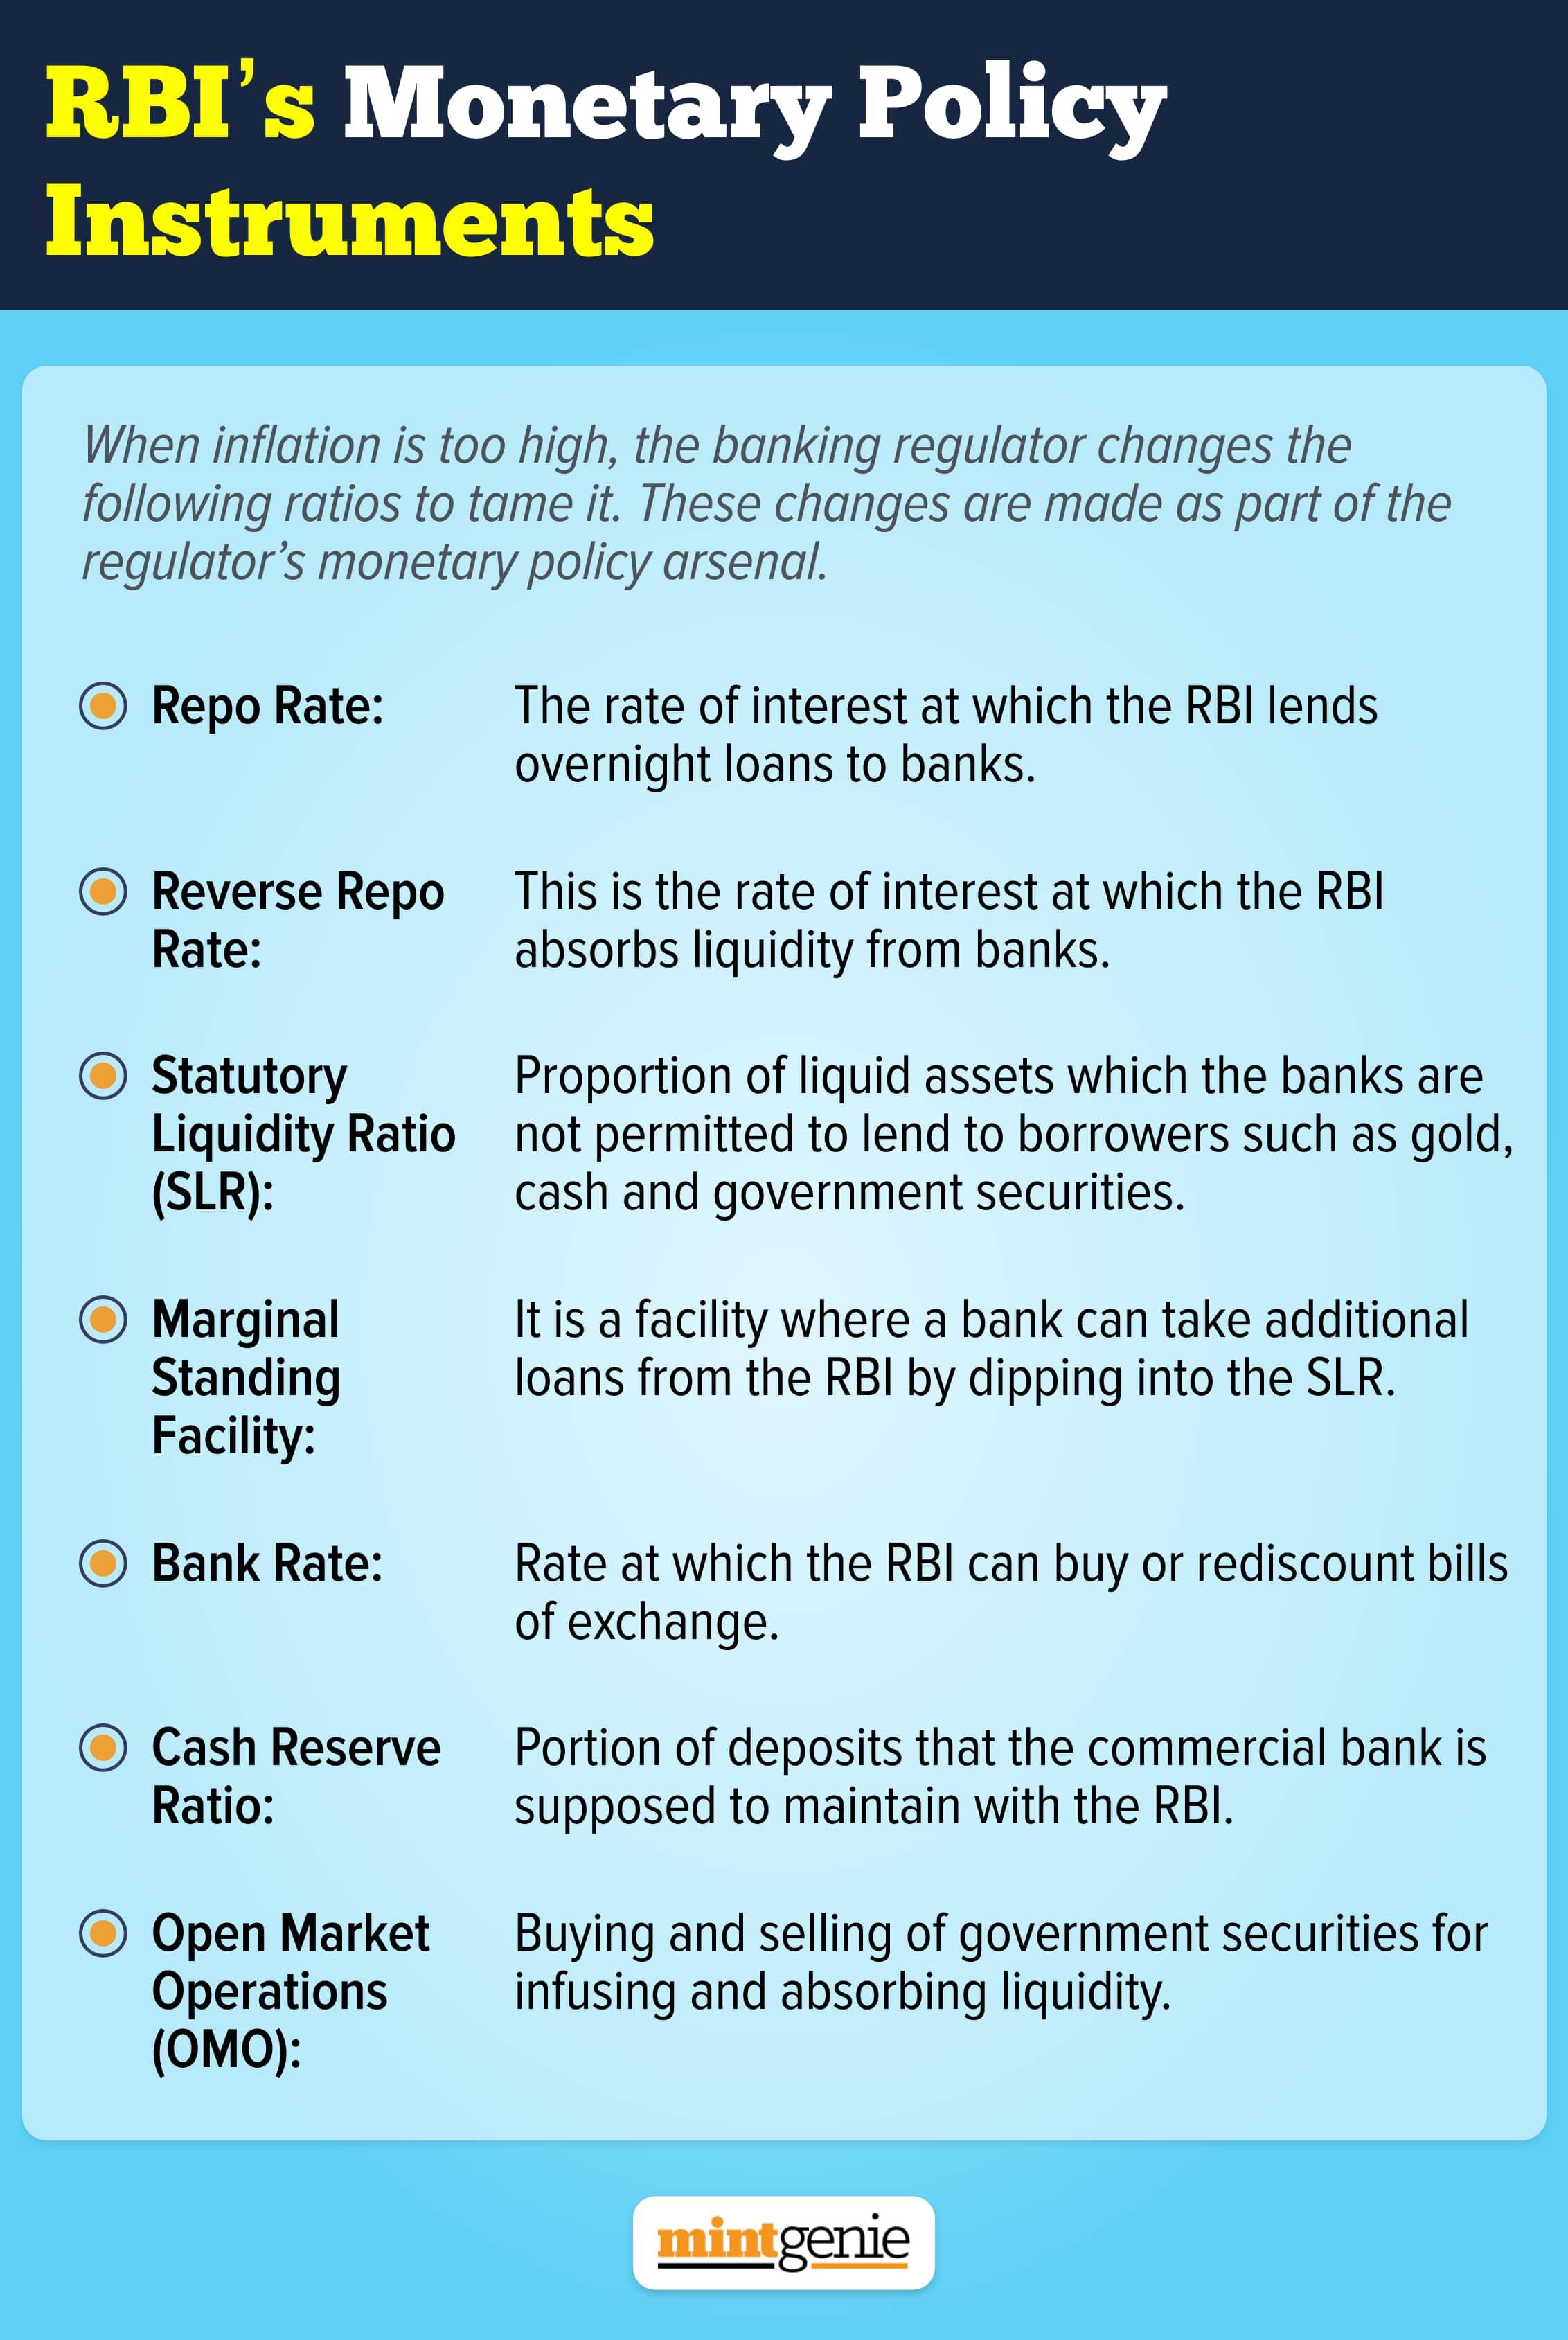 These are the RBI's monetary policy instruments.